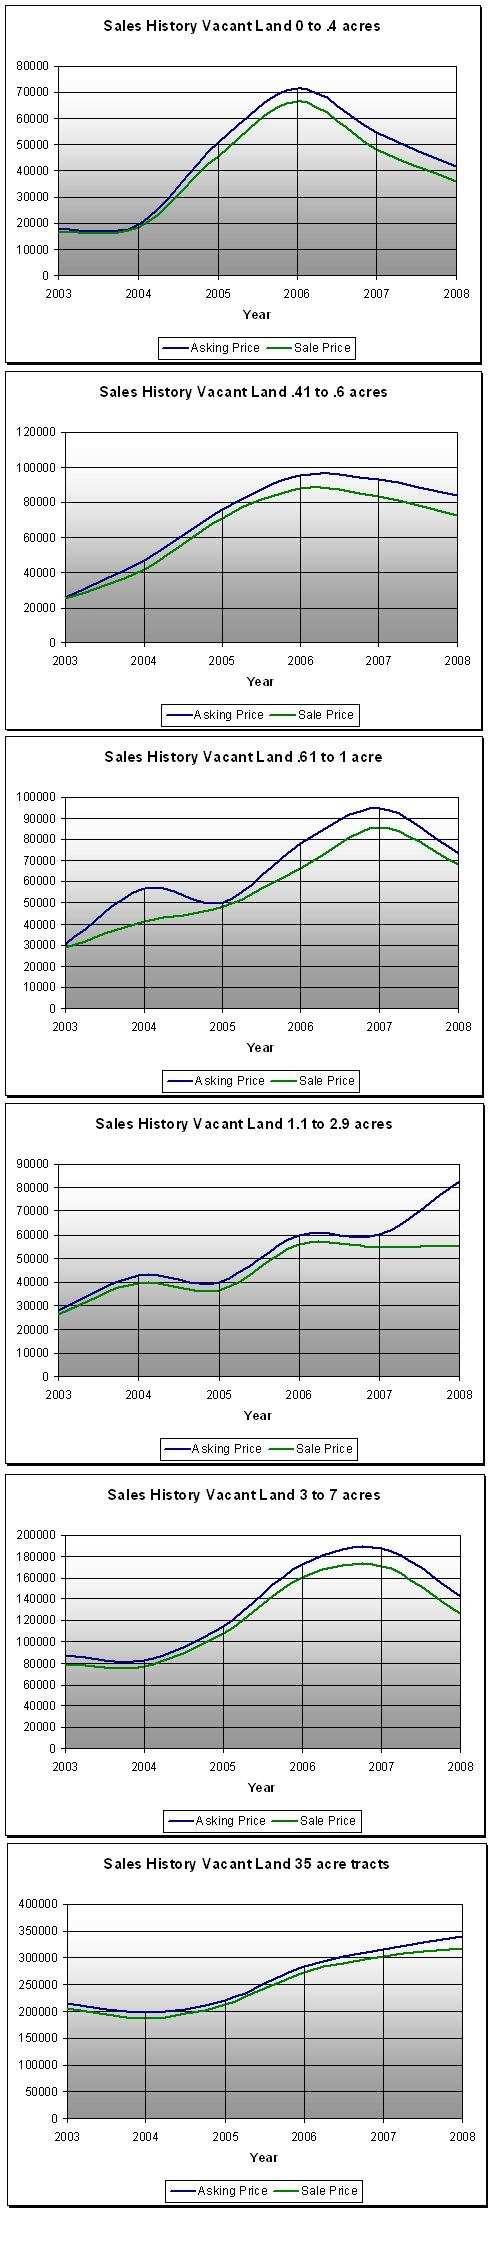 History of vacant land sales in Pagosa Springs Colorado from 2003 to 2008 catogorized by parcel size.